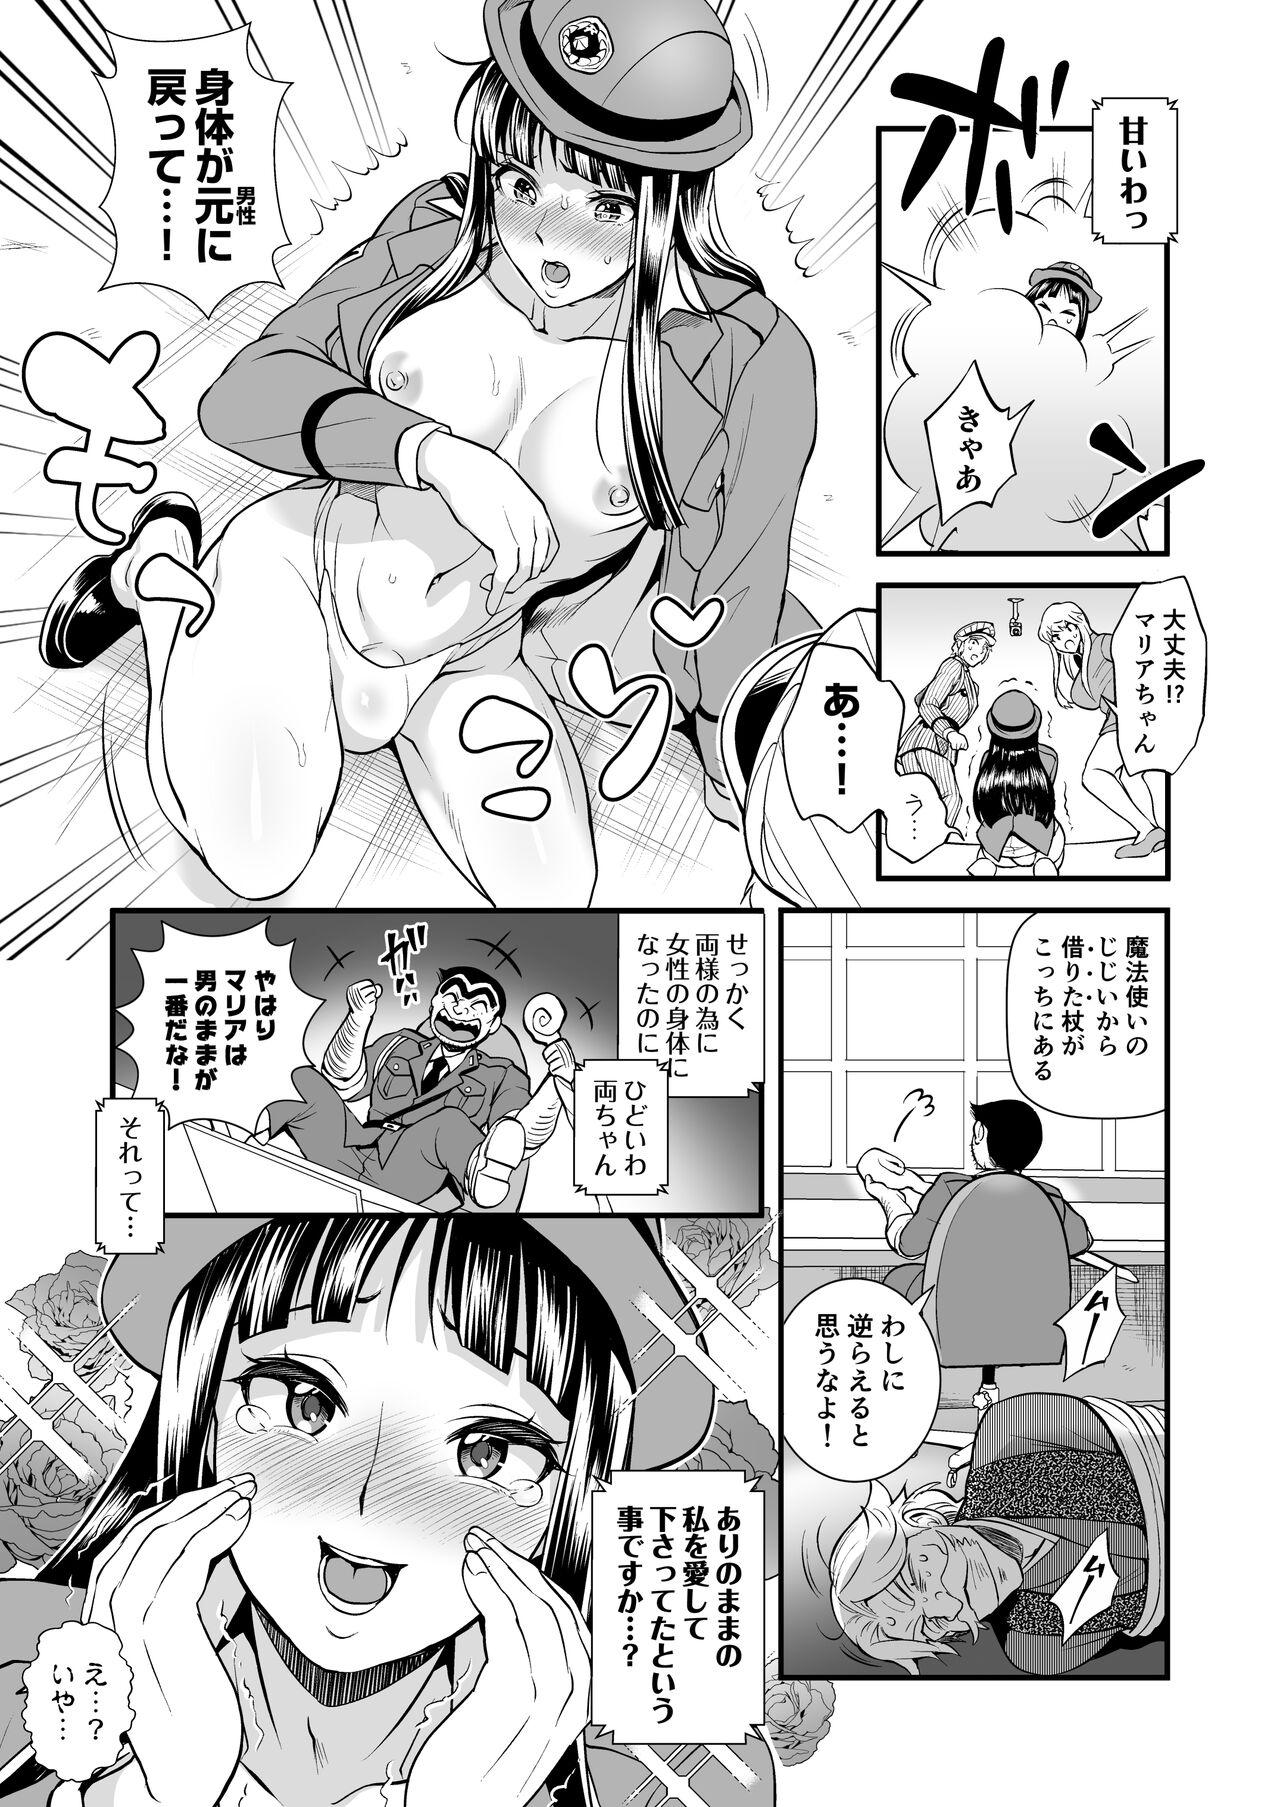 Olderwoman Volume of the room where Reiko & Maria & Nakagawa can't leave unless they do something crazy - Kochikame Mallu - Page 9